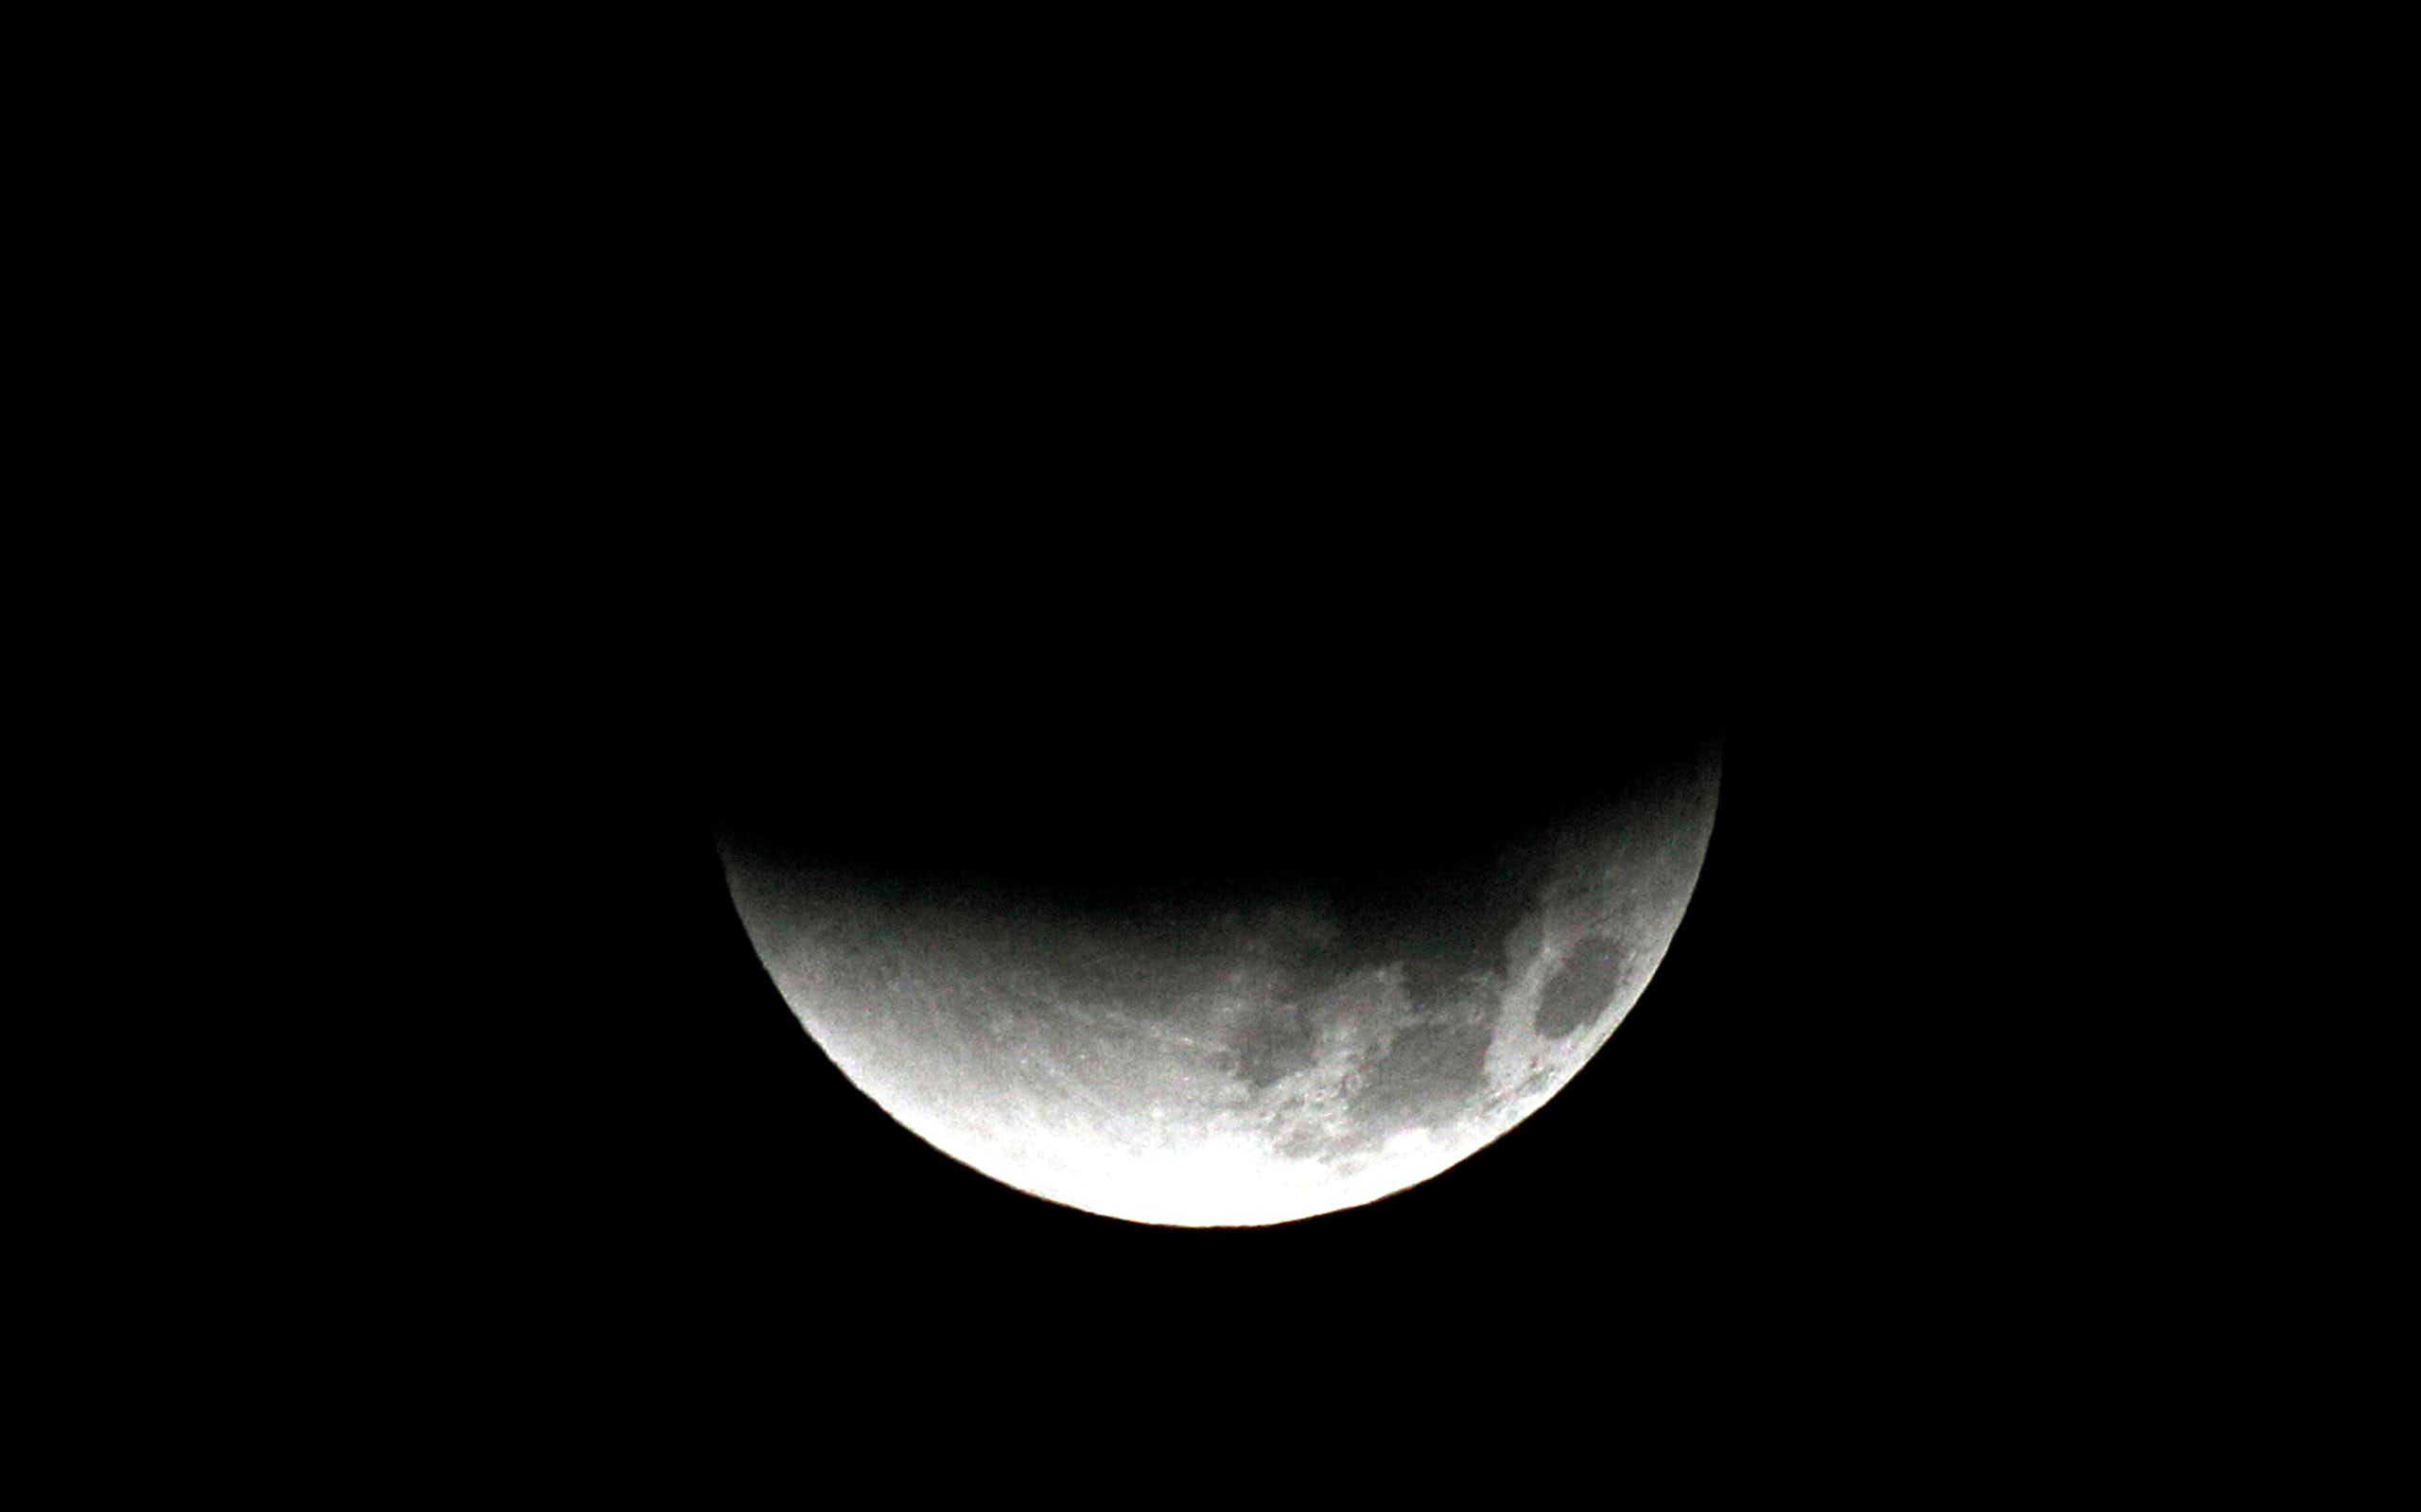 The moon, partially shadowed on the top side, against a dark background.